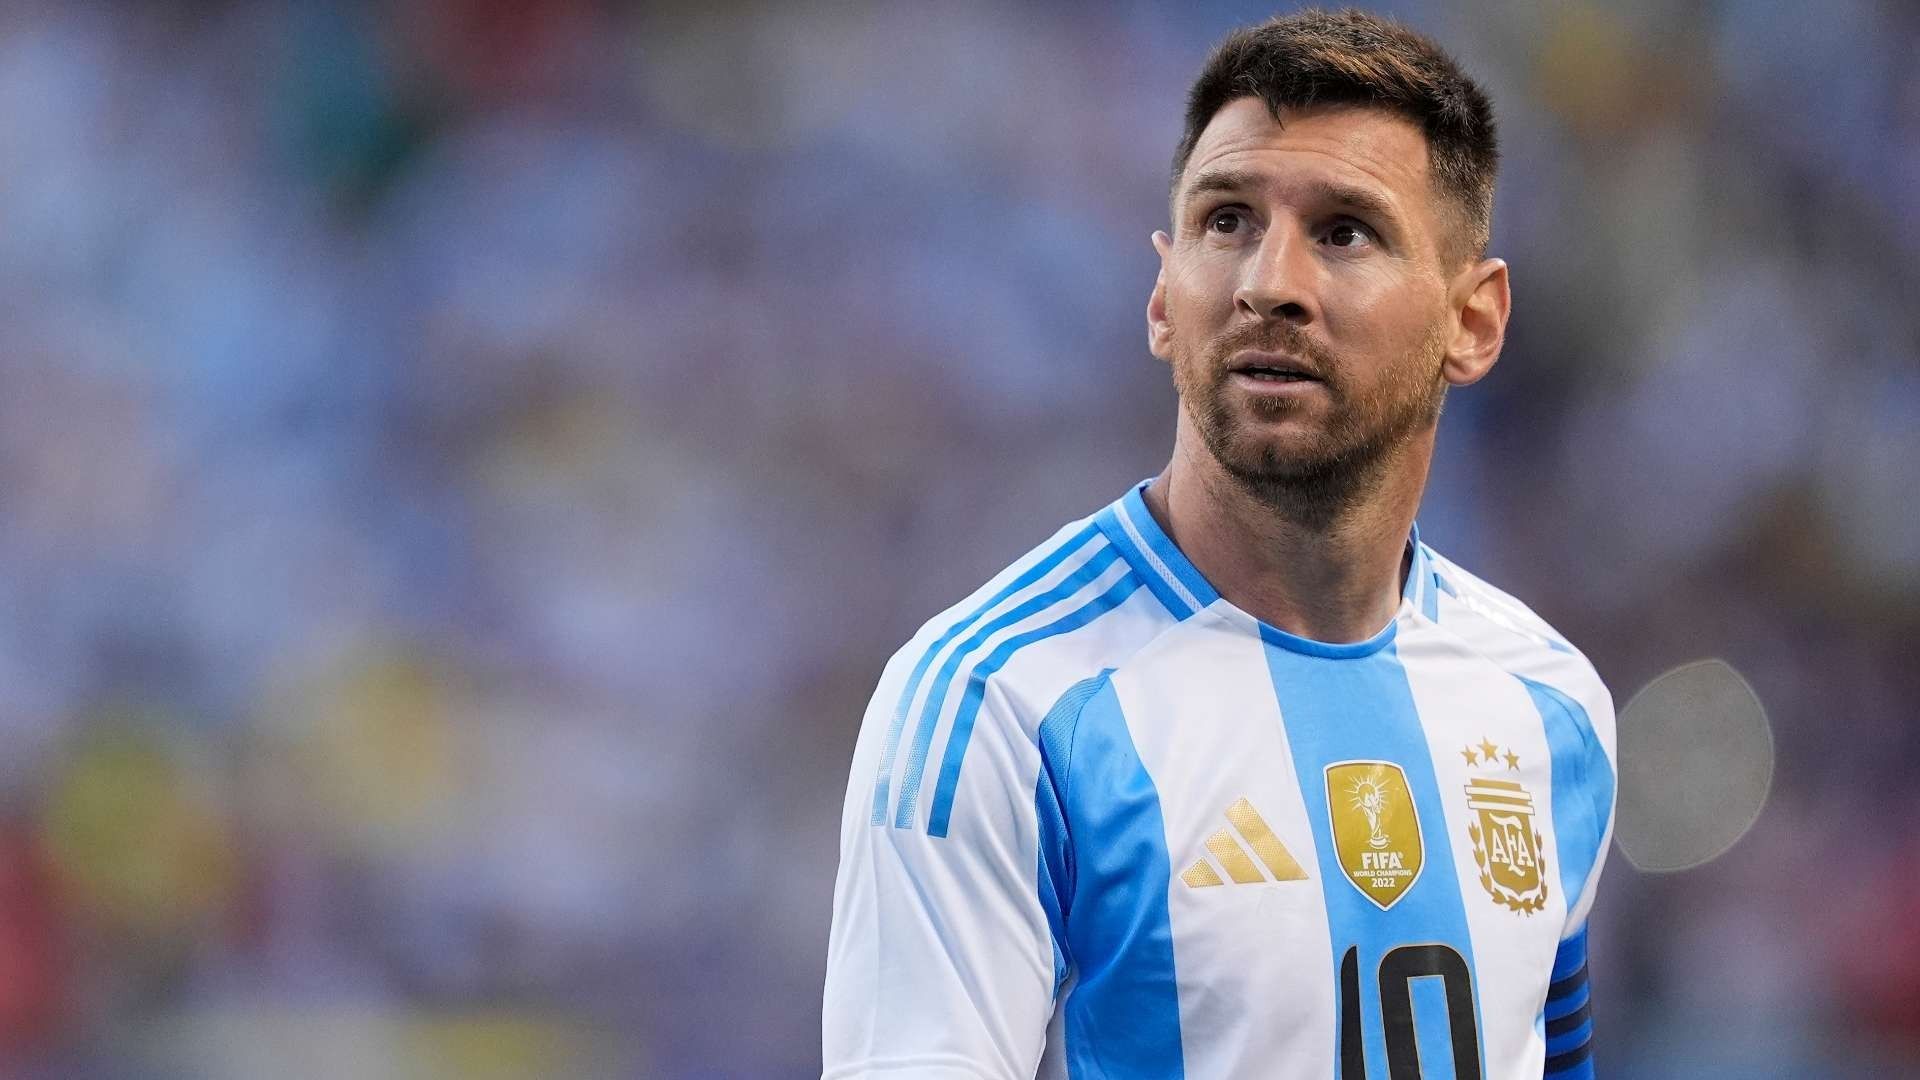 Official: Messi Not Included In Argentina's Bid For Paris Olympics